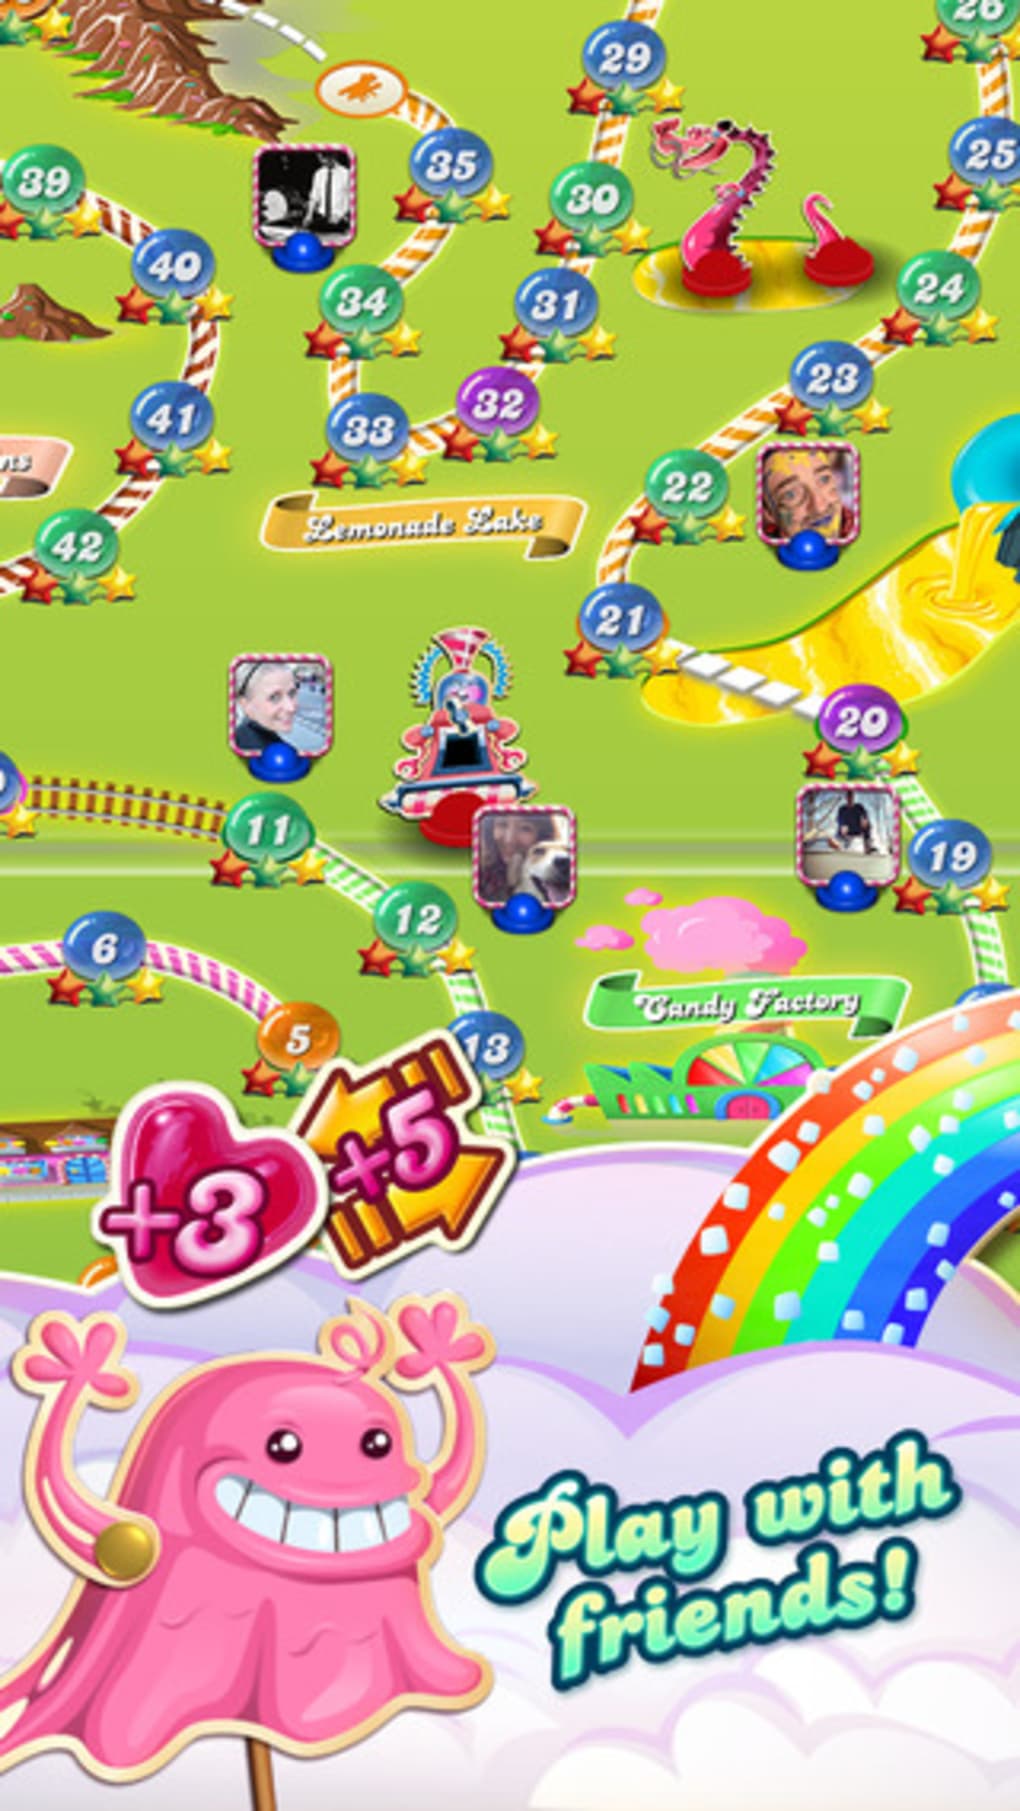 download the last version for iphoneCandy Crush Friends Saga